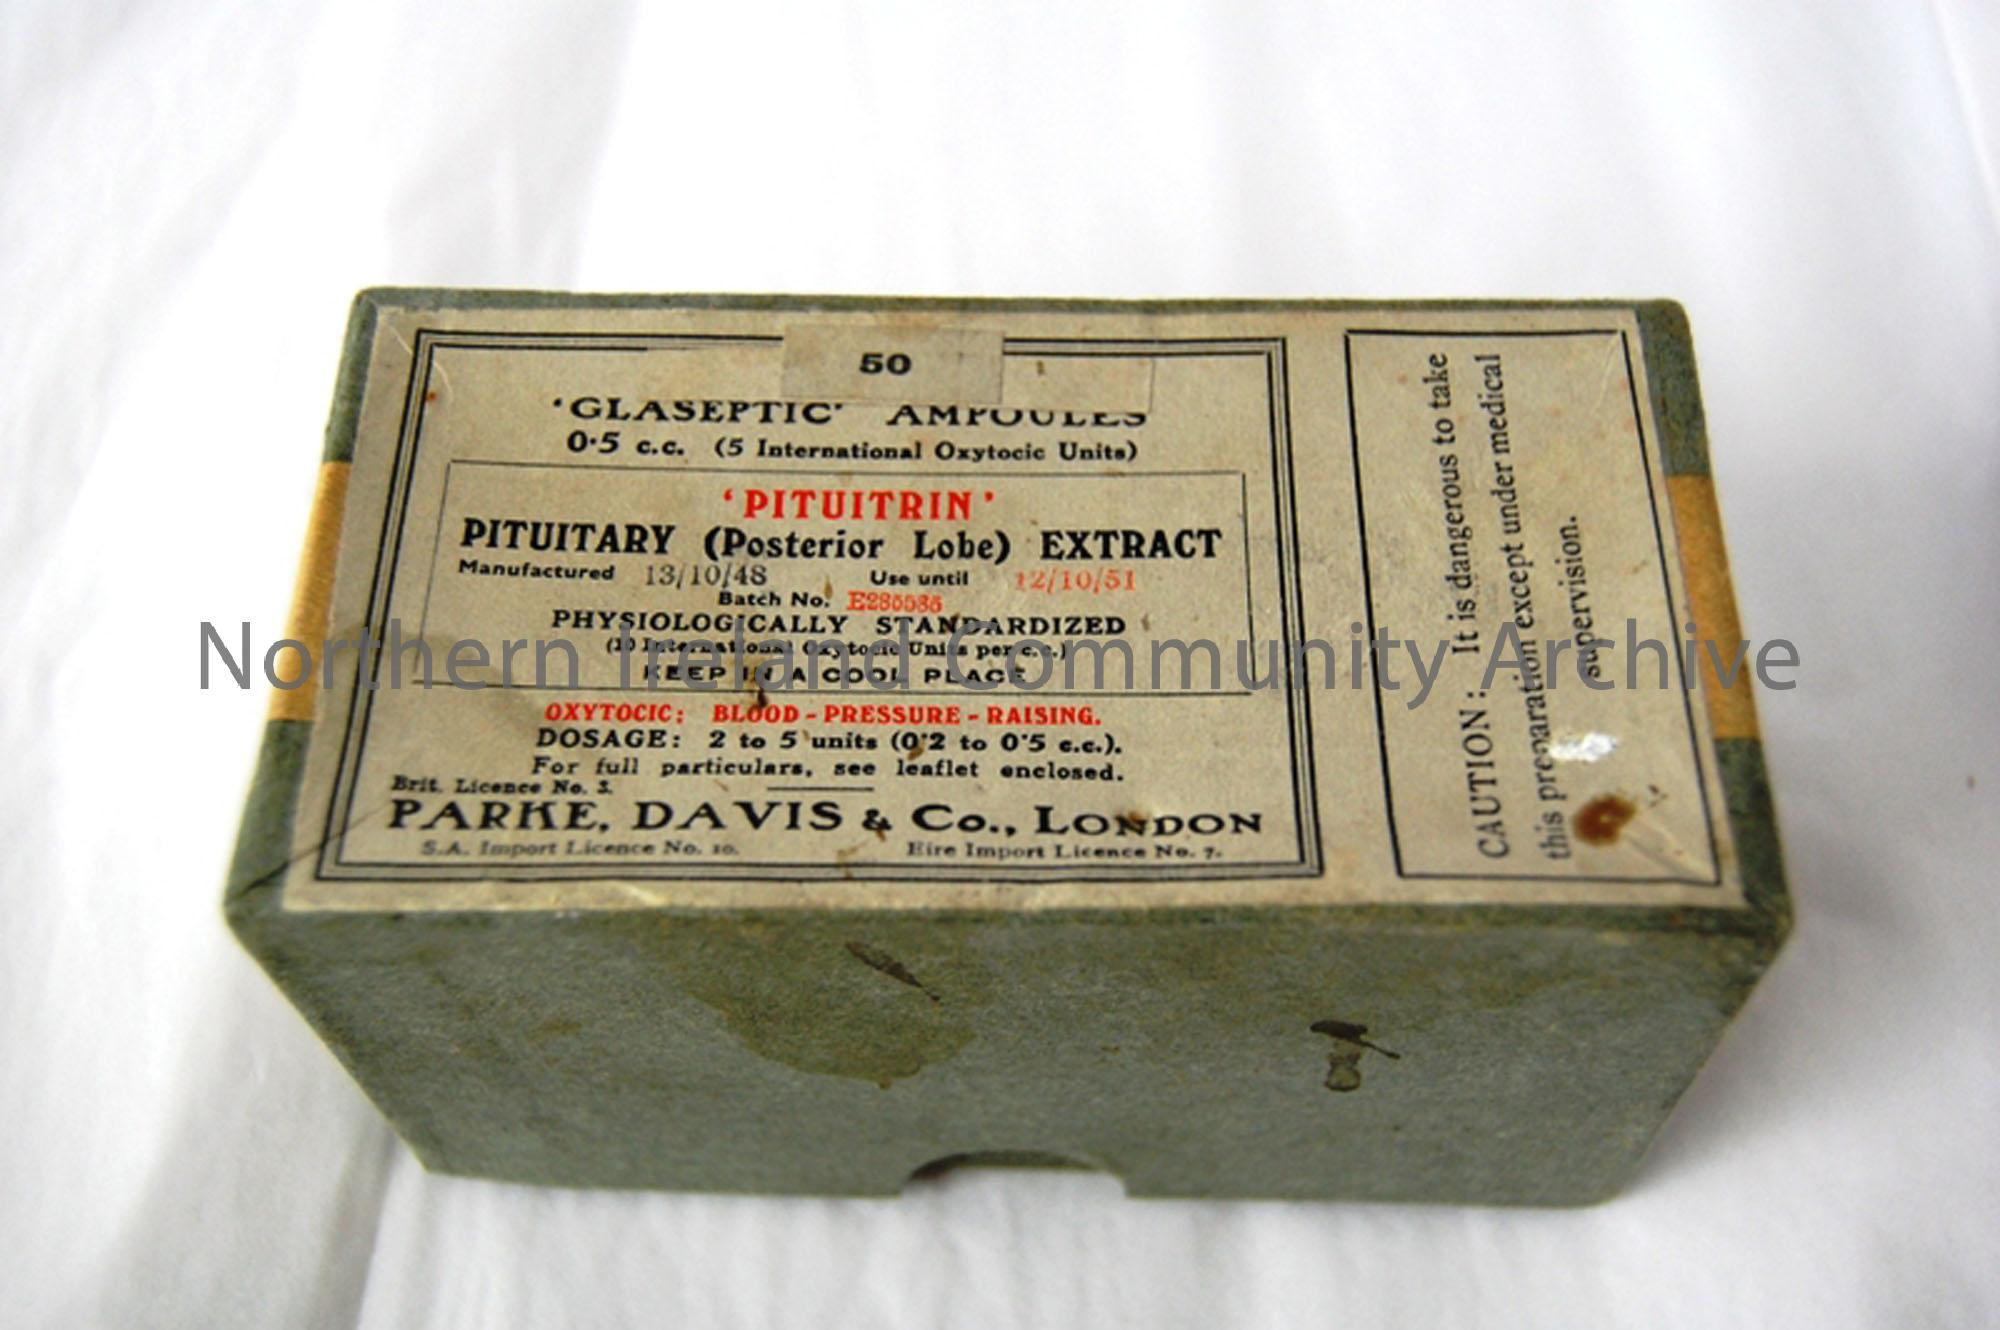 Box containing Pituitrin dated 12/10/51.